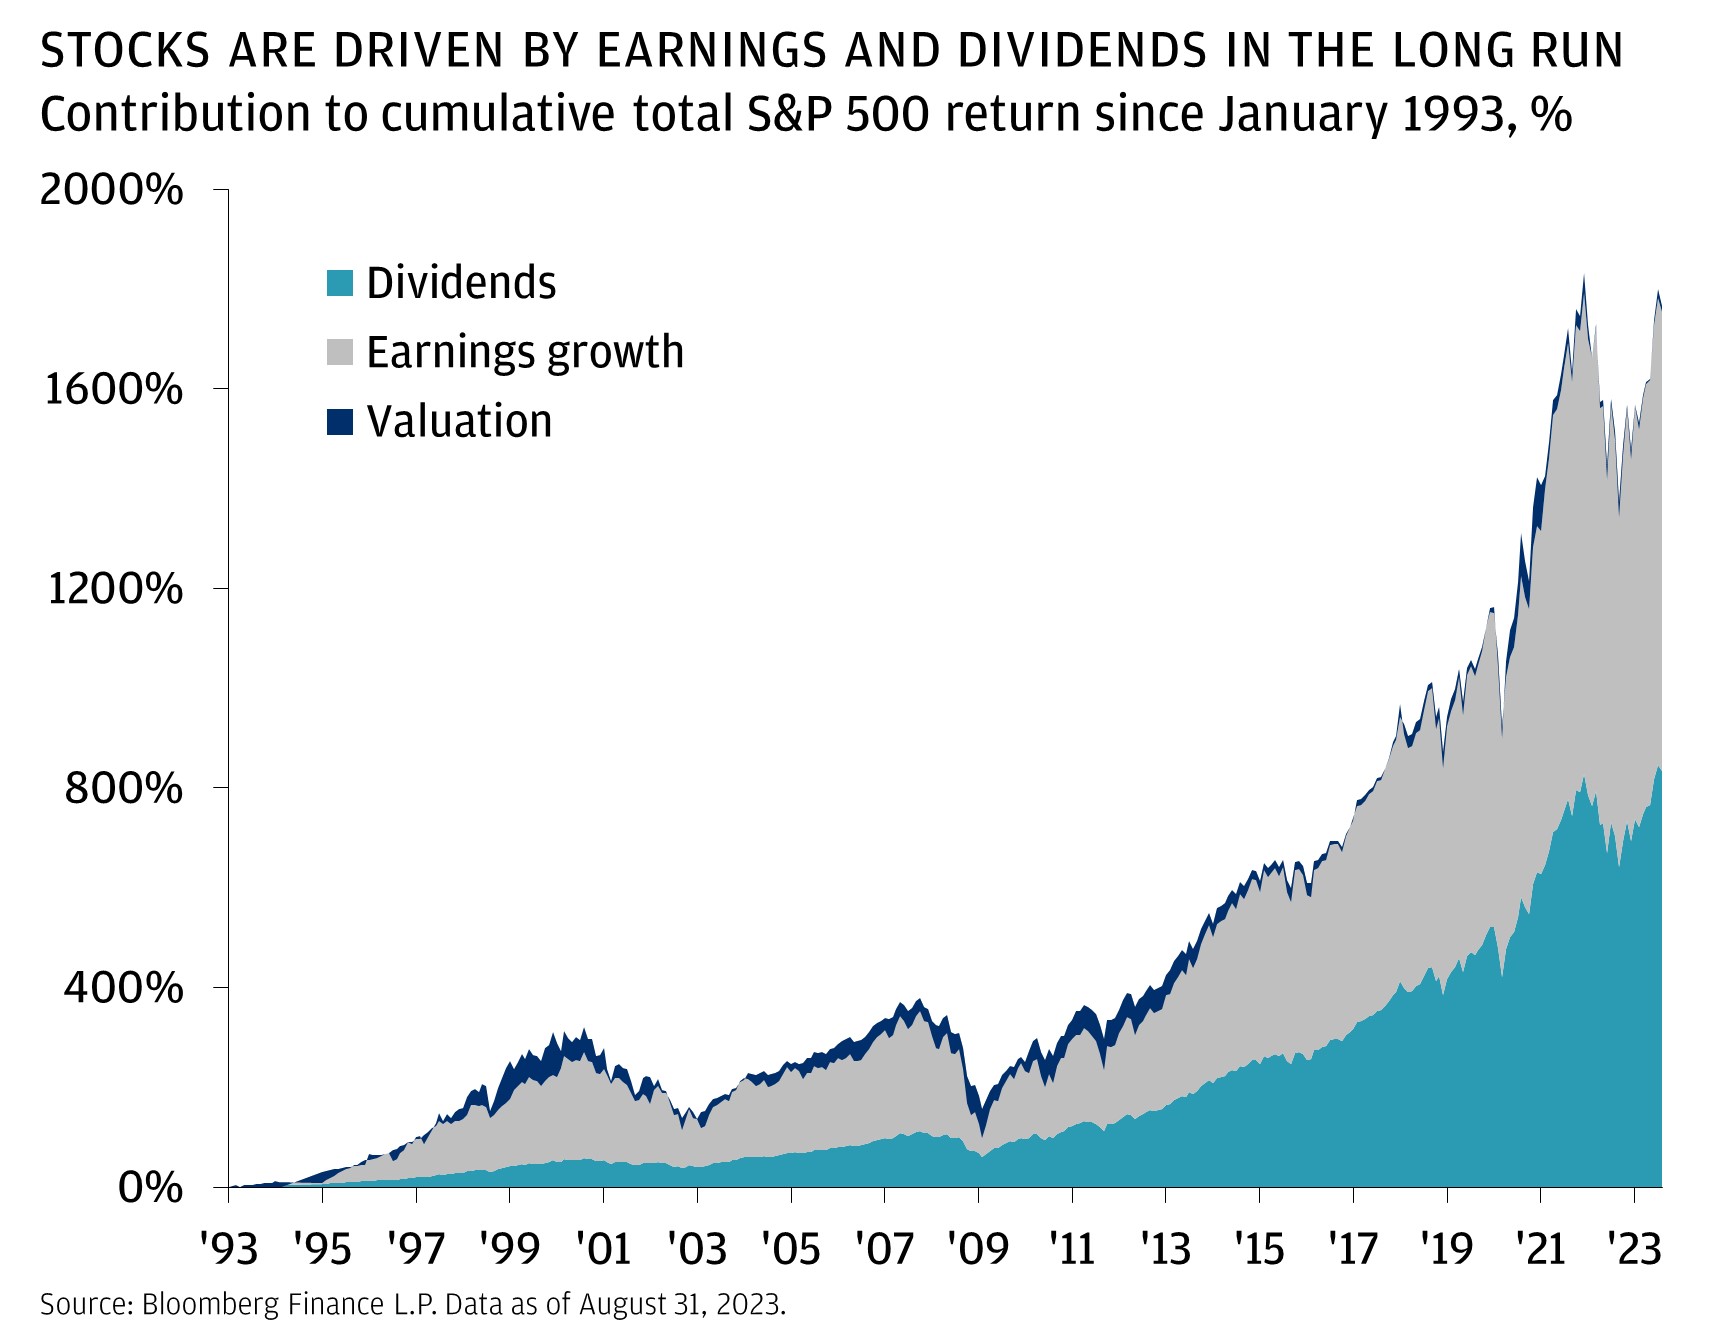 STOCKS ARE DRIVEN BY EARNINGS AND DIVIDENDS IN THE LONG RUN